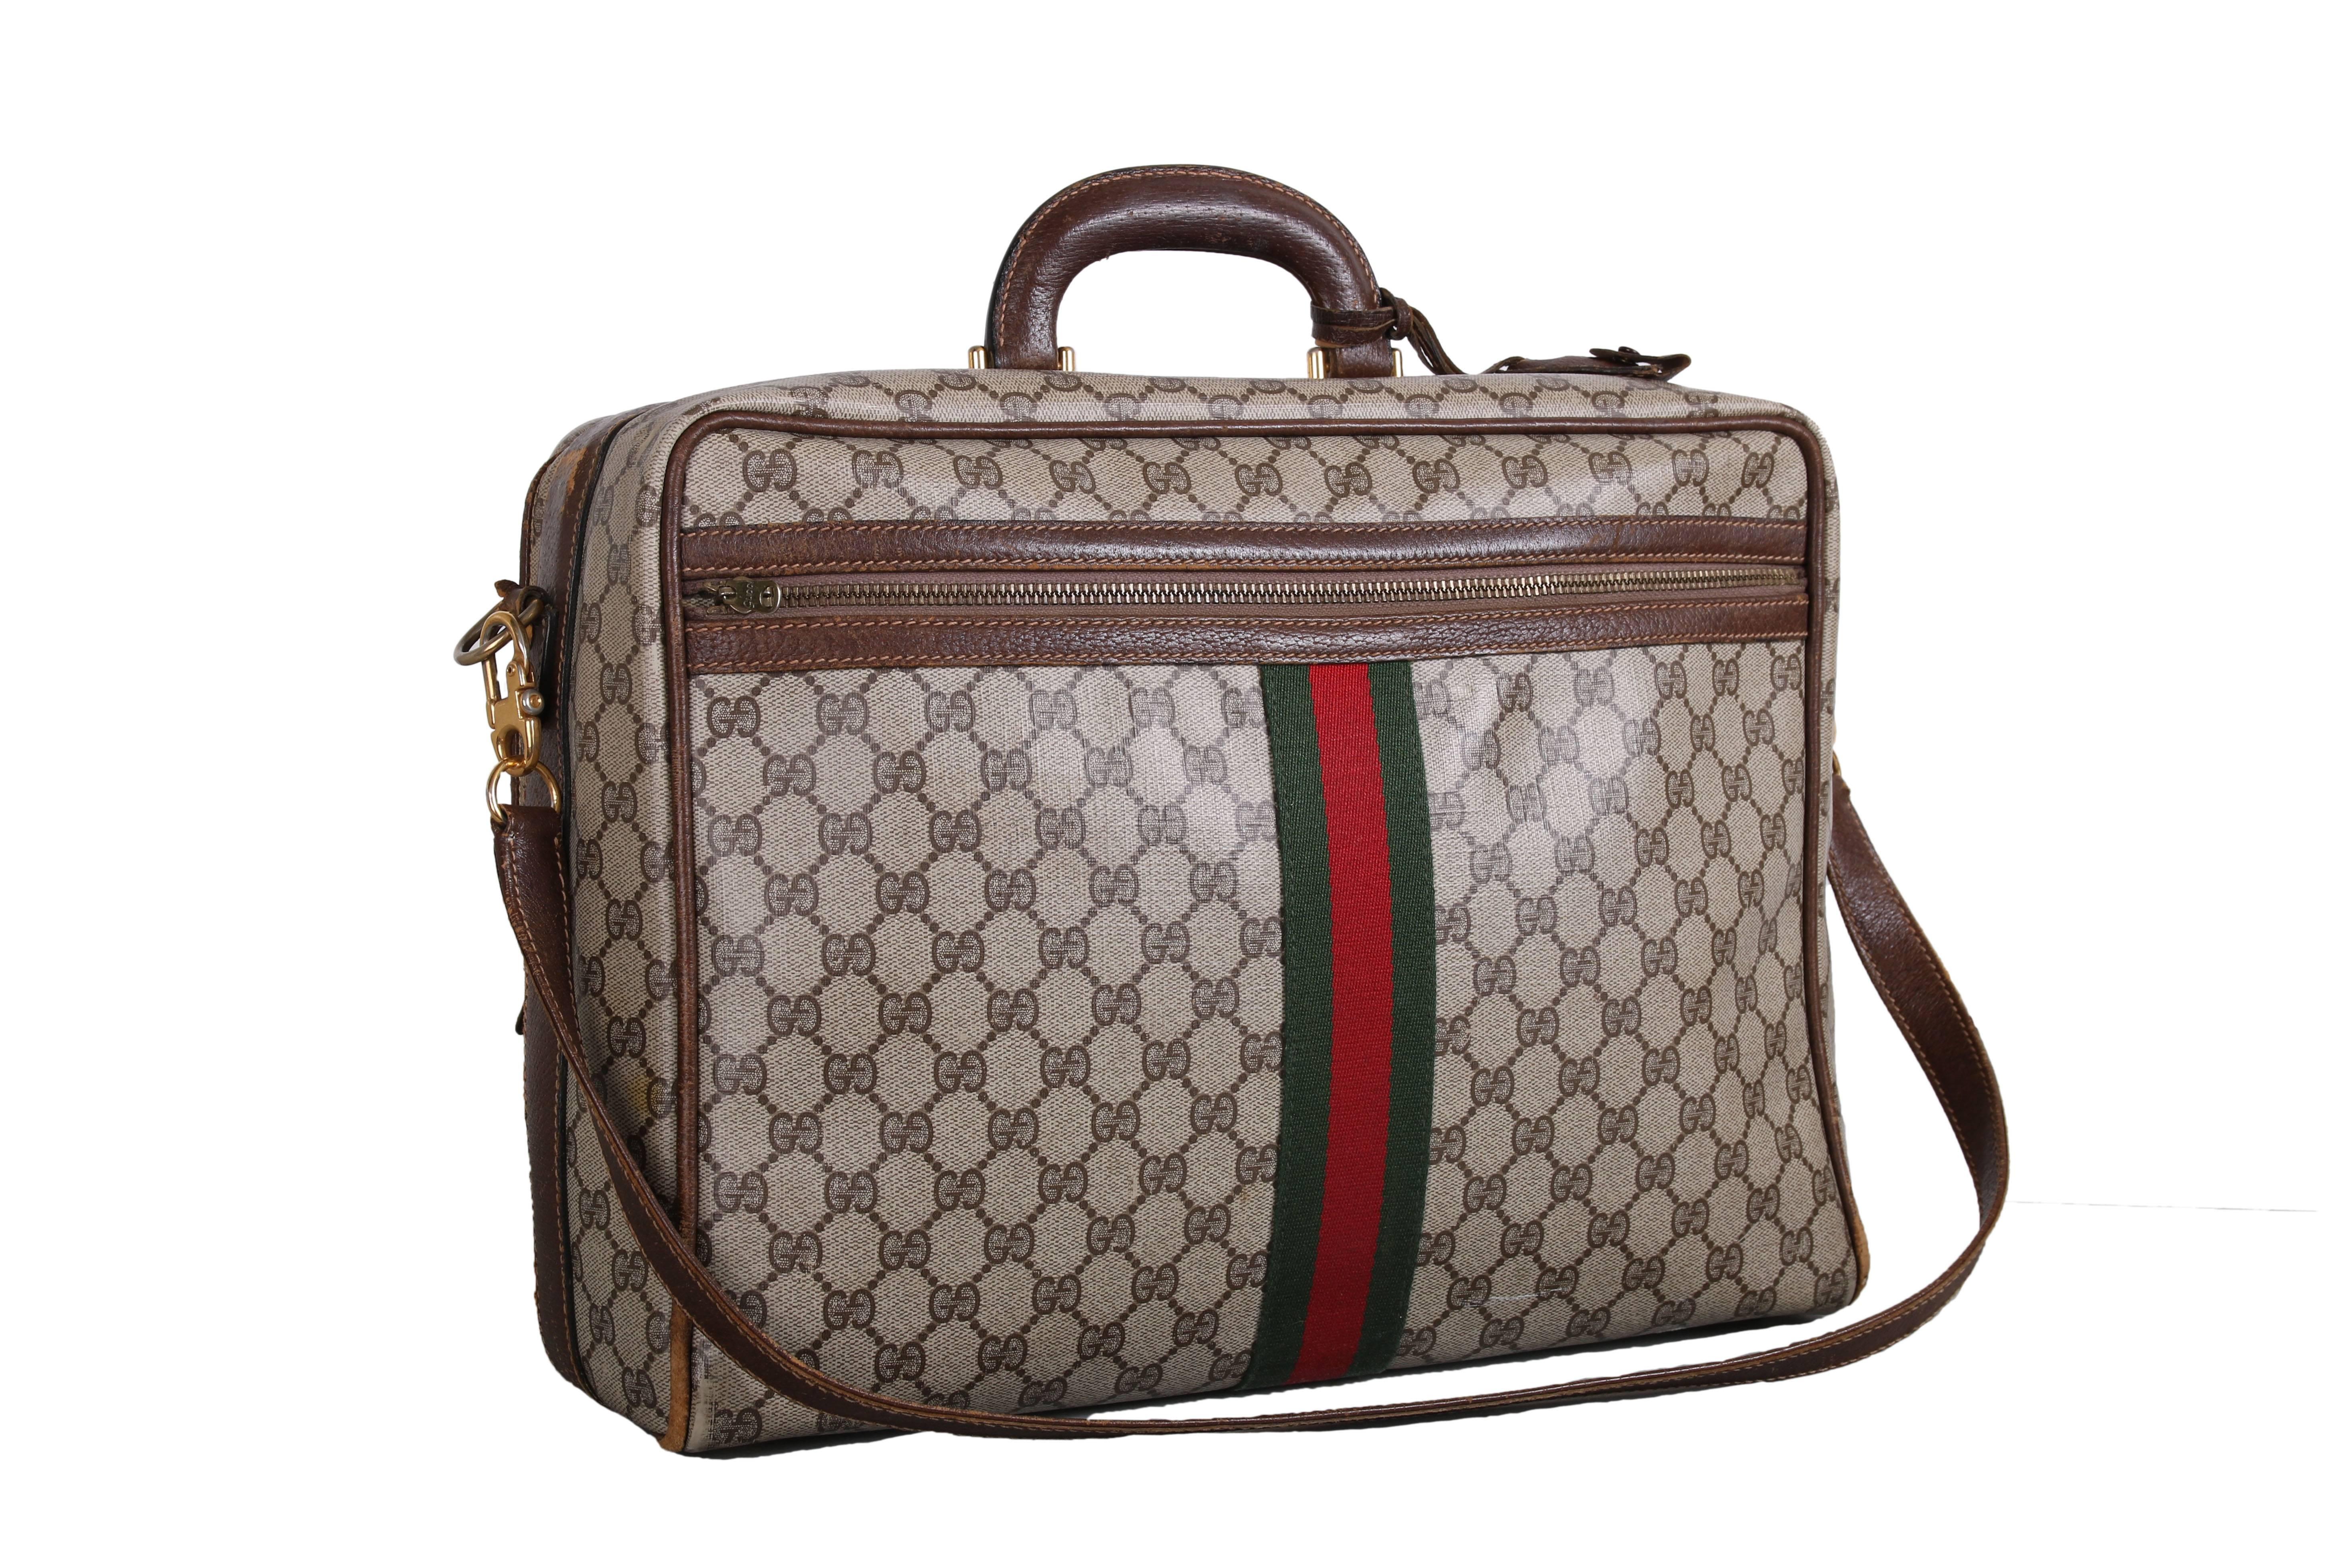 1970's Gucci canvas travel or computer bag w/GG diamond web print, leather trim, green and red racer stripe down center front and back, a zippered compartment at front and back, detachable shoulder strap and leather top handle. Bag is in good